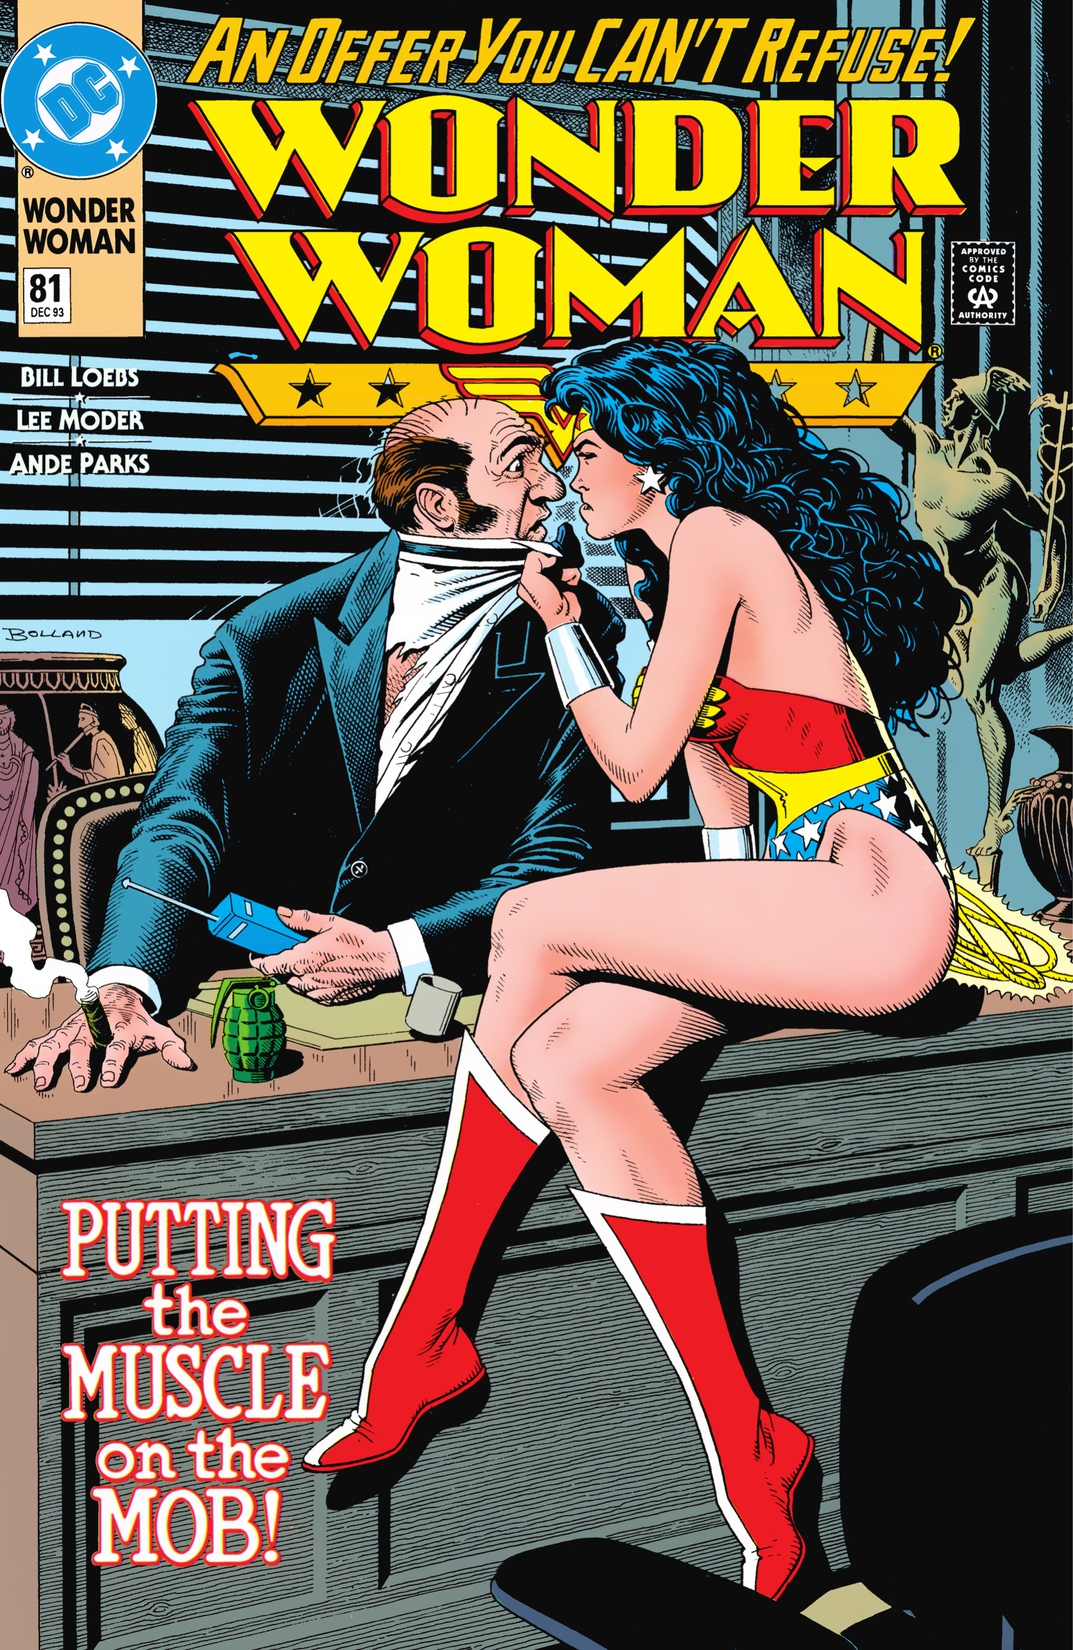 Wonder Woman (1987-2006) #81 preview images